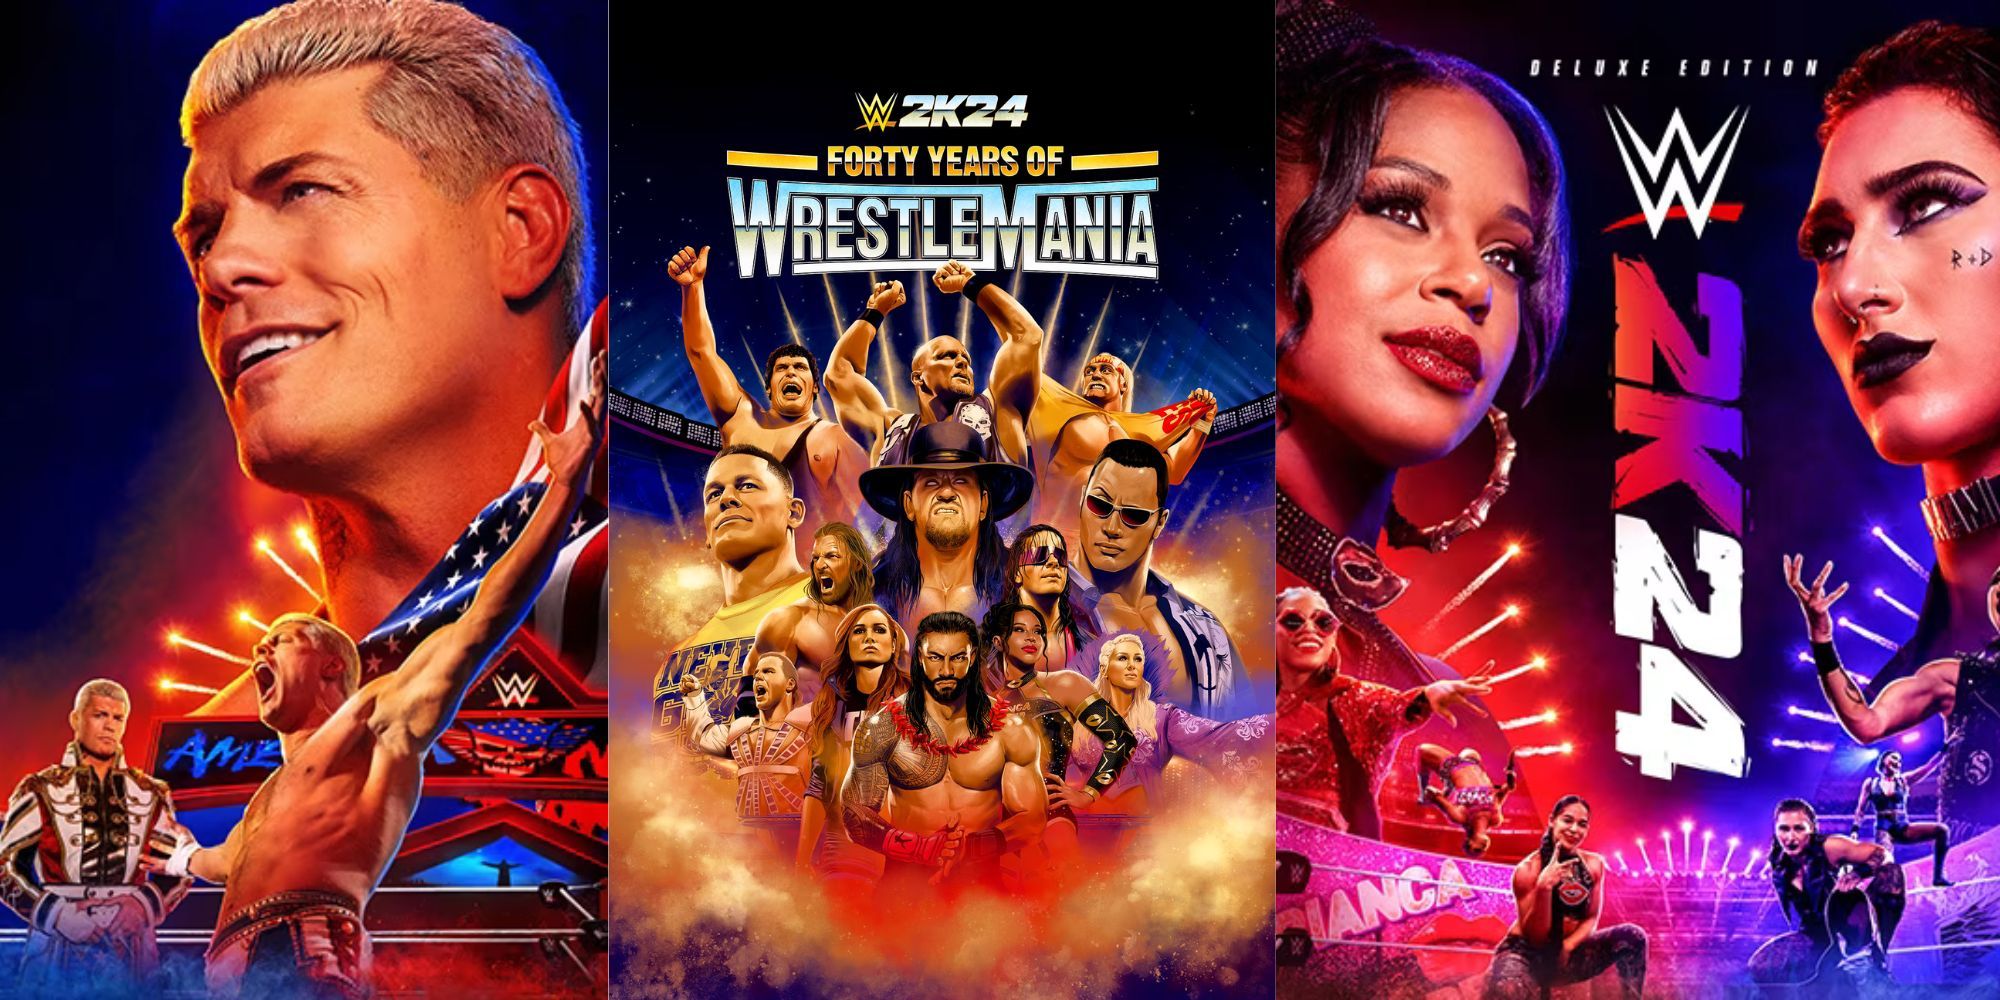 The three covers for the different editions of WWE 2K24